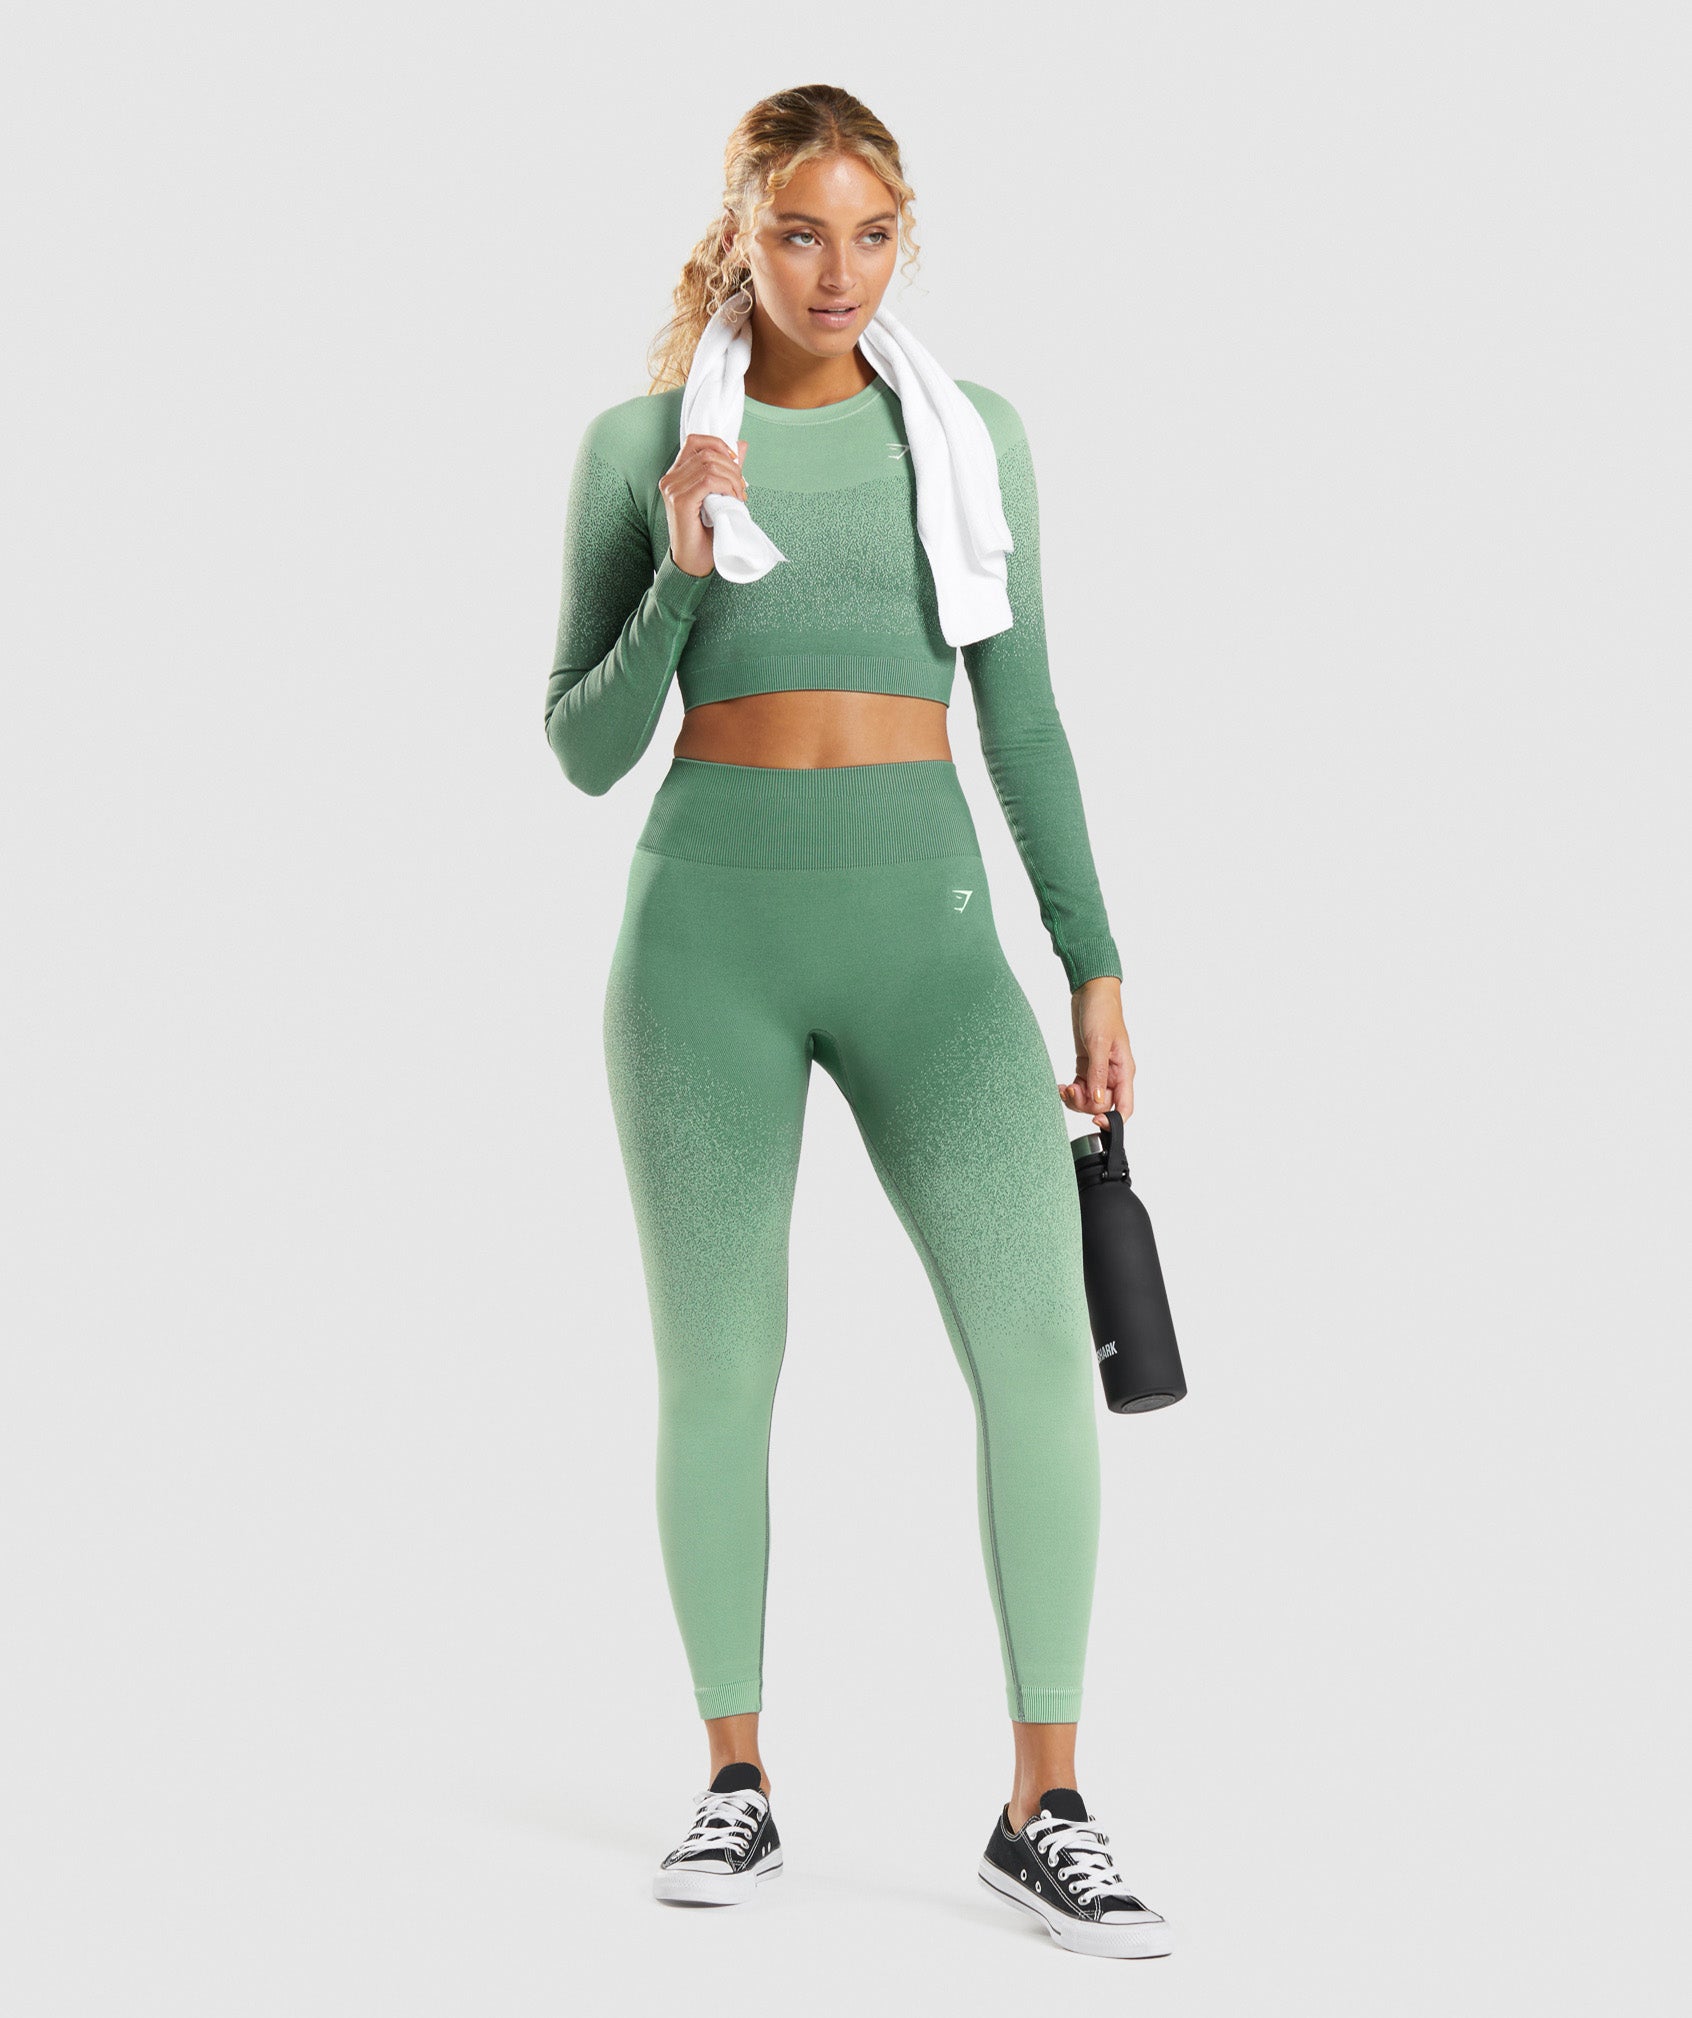 Adapt Seamless Ombre Leggings Collection  Seamless leggings, Womens  workout outfits, Gymshark